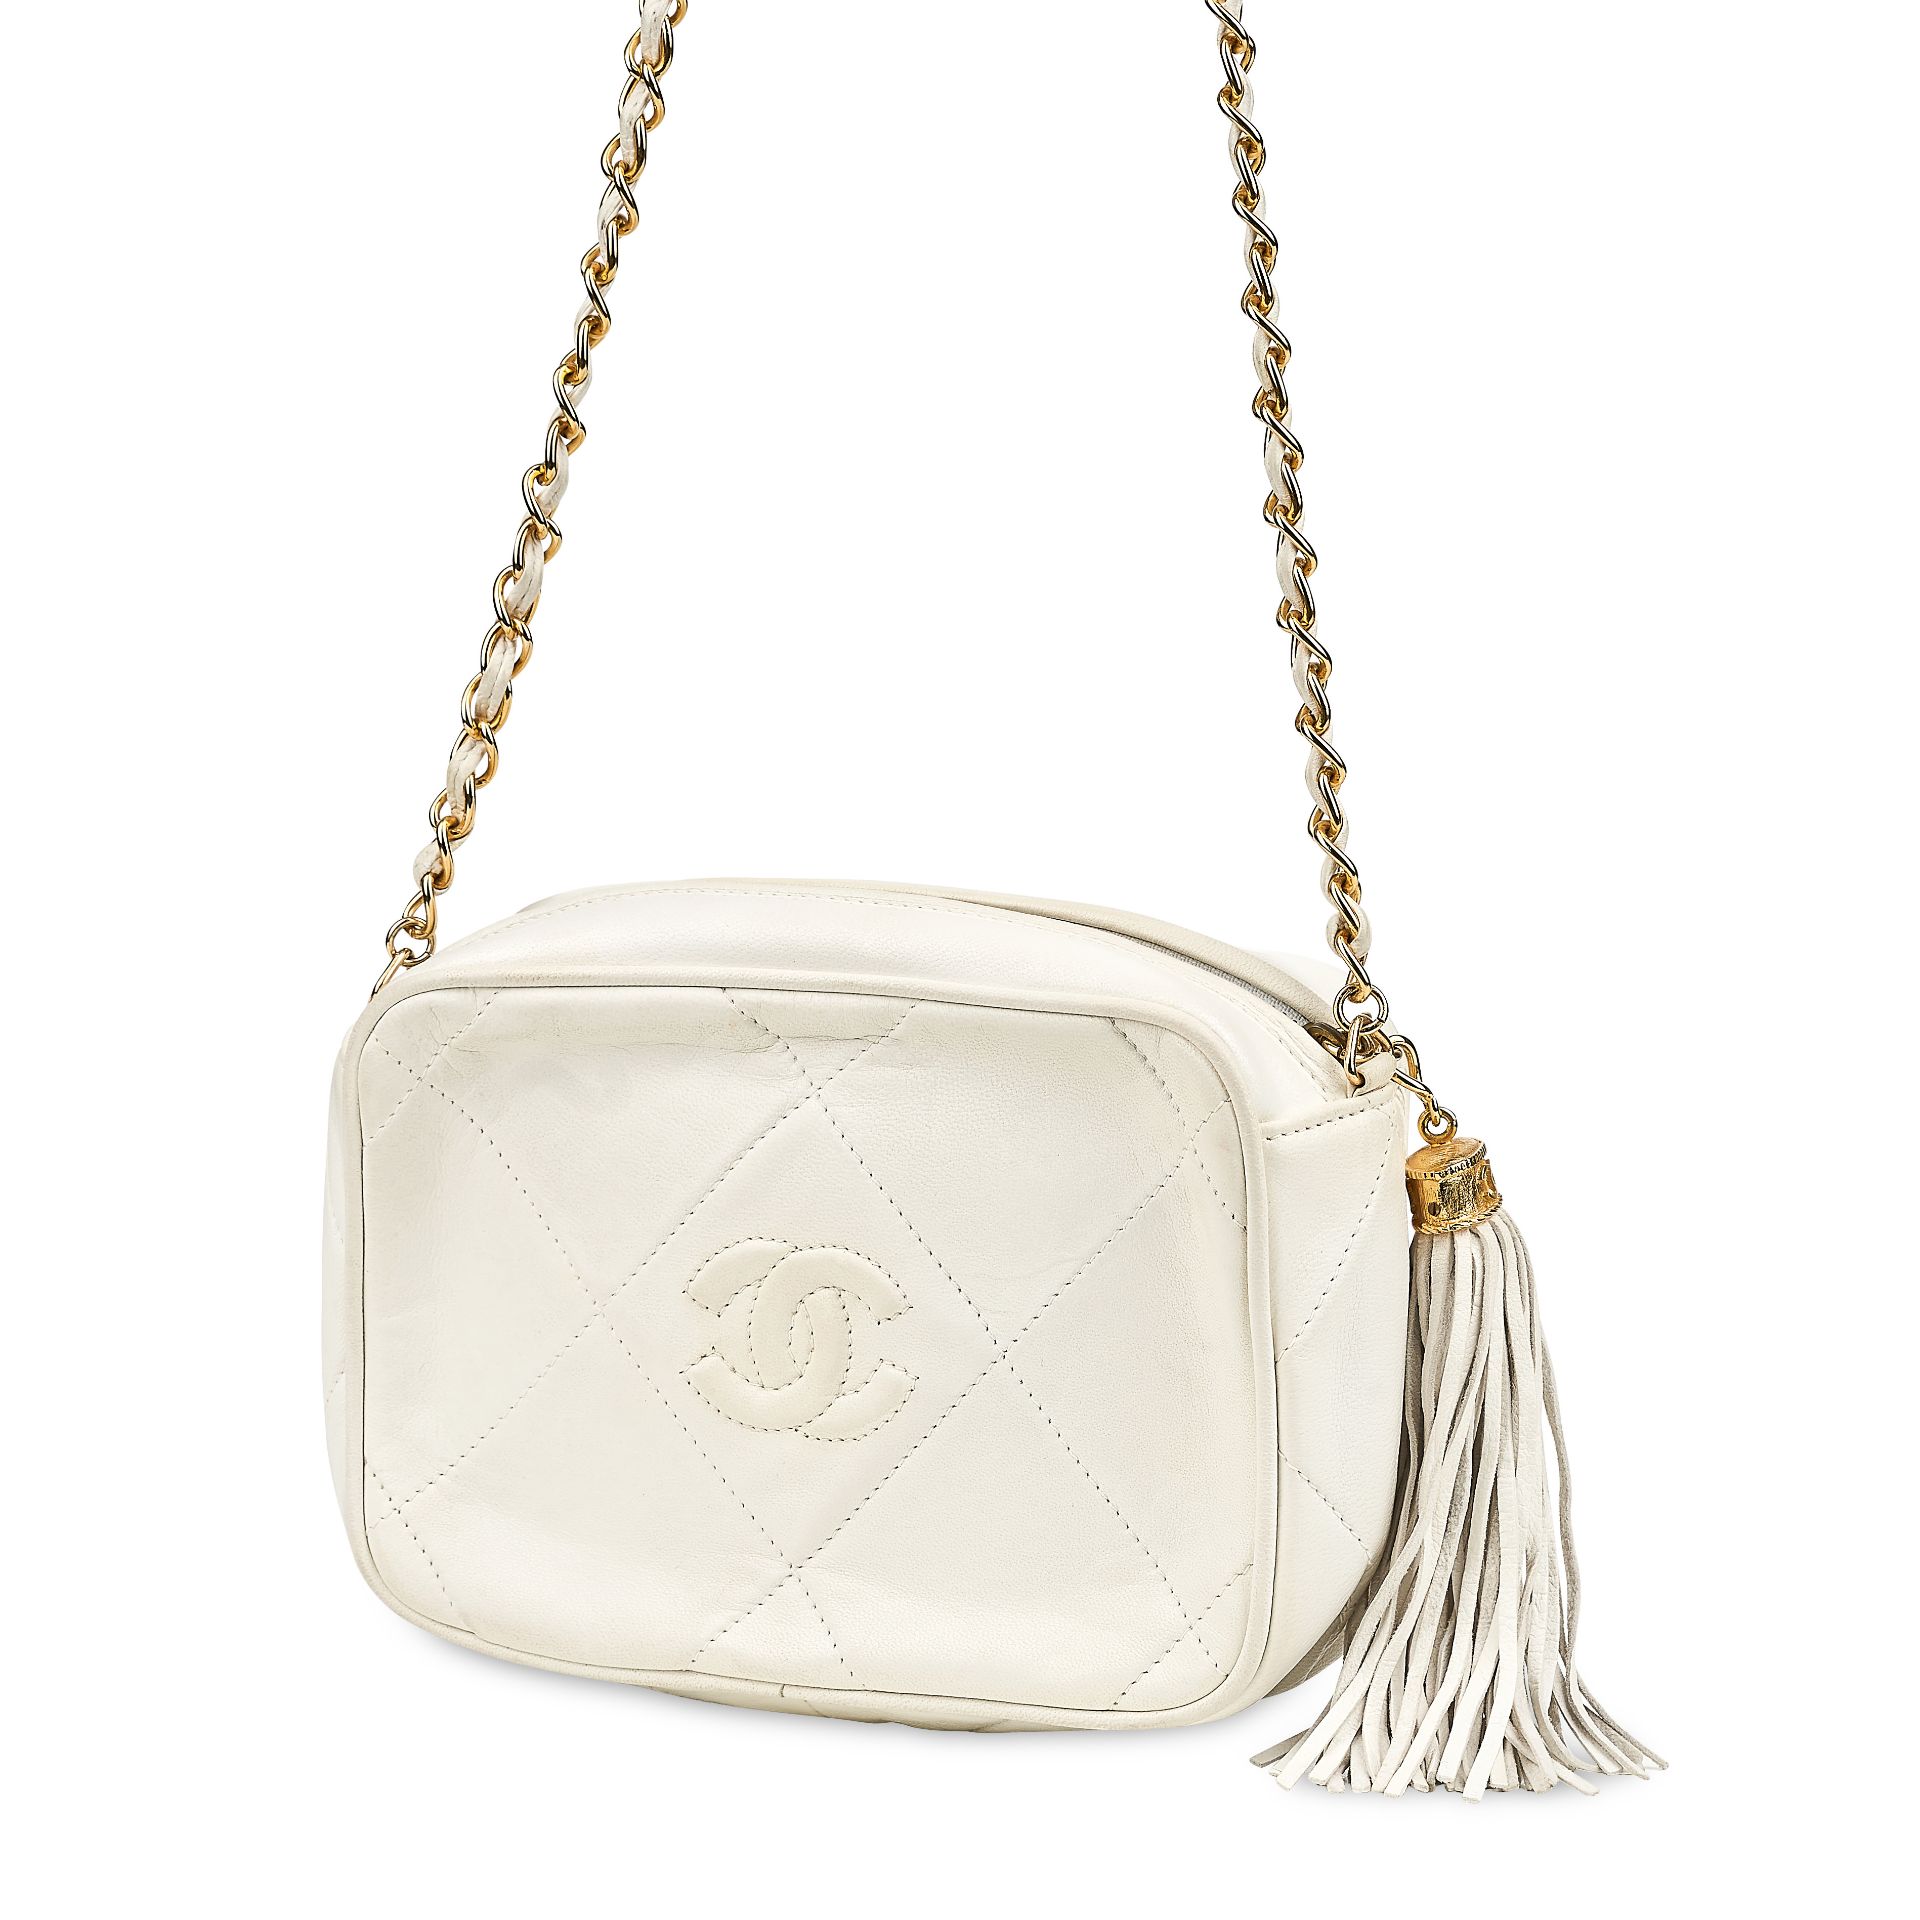 CHANEL, A WHITE VINTAGE CAMERA BAG, Condition grade B. Produced between 1986-1988 - Image 2 of 7